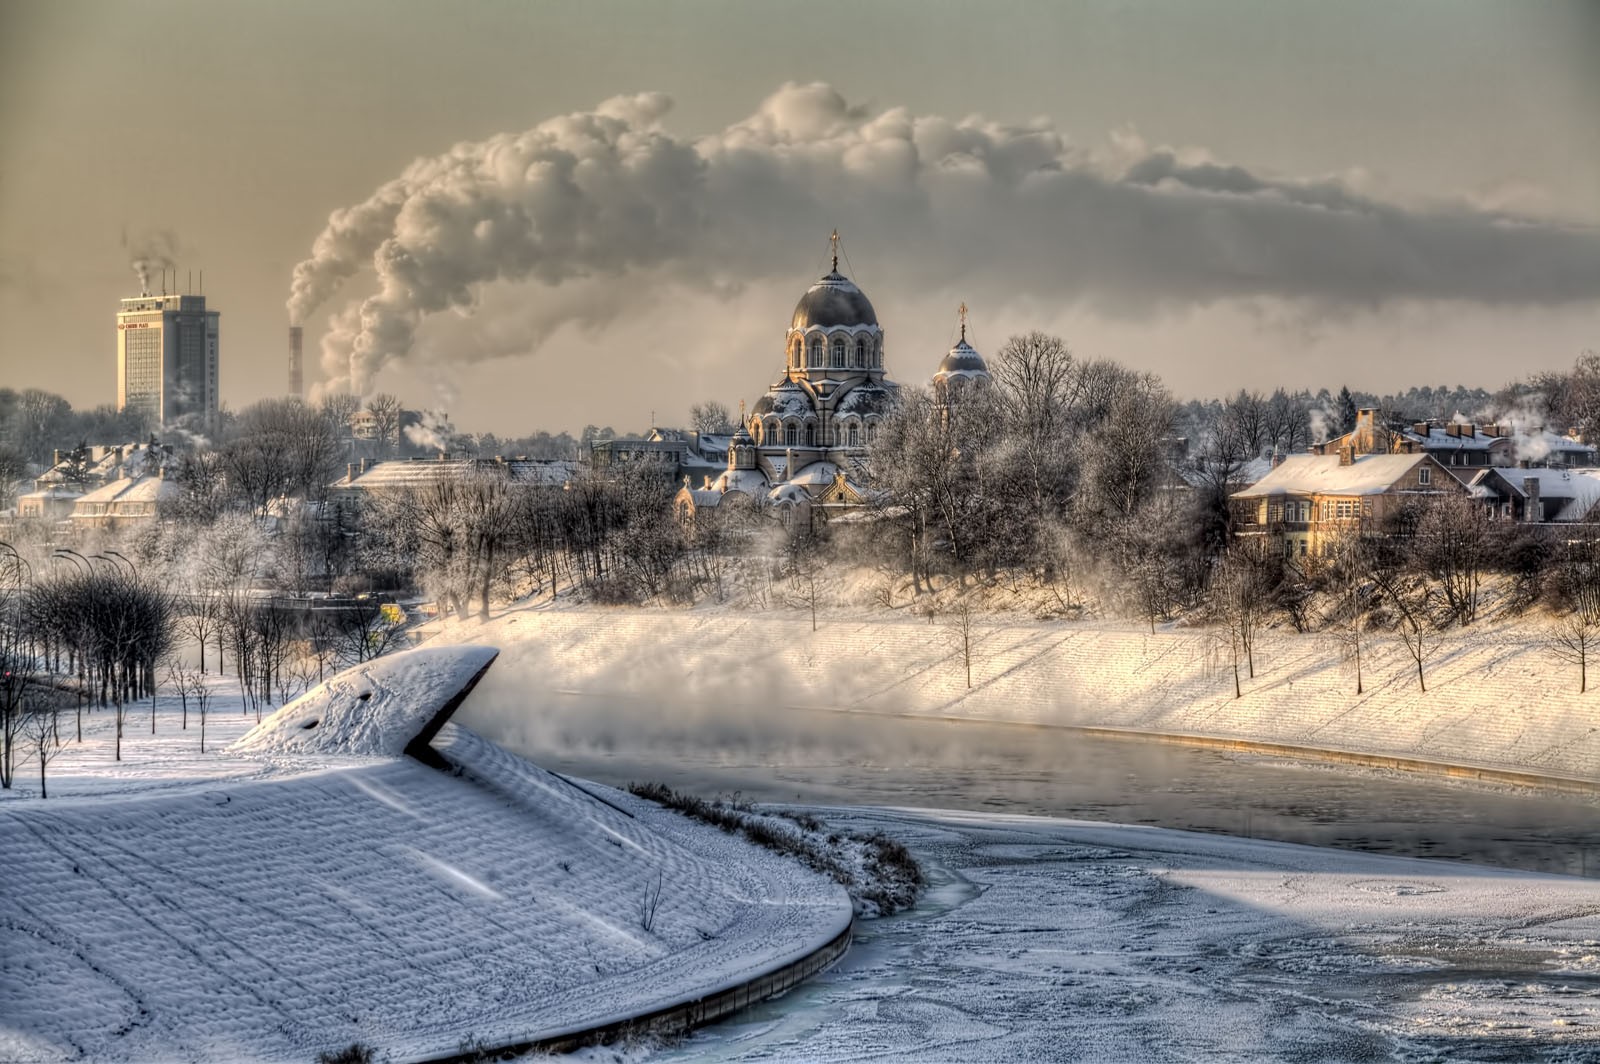 General 1600x1064 architecture city cityscape trees building Lithuania landscape winter snow cathedral smoke chimneys frost frozen river cold